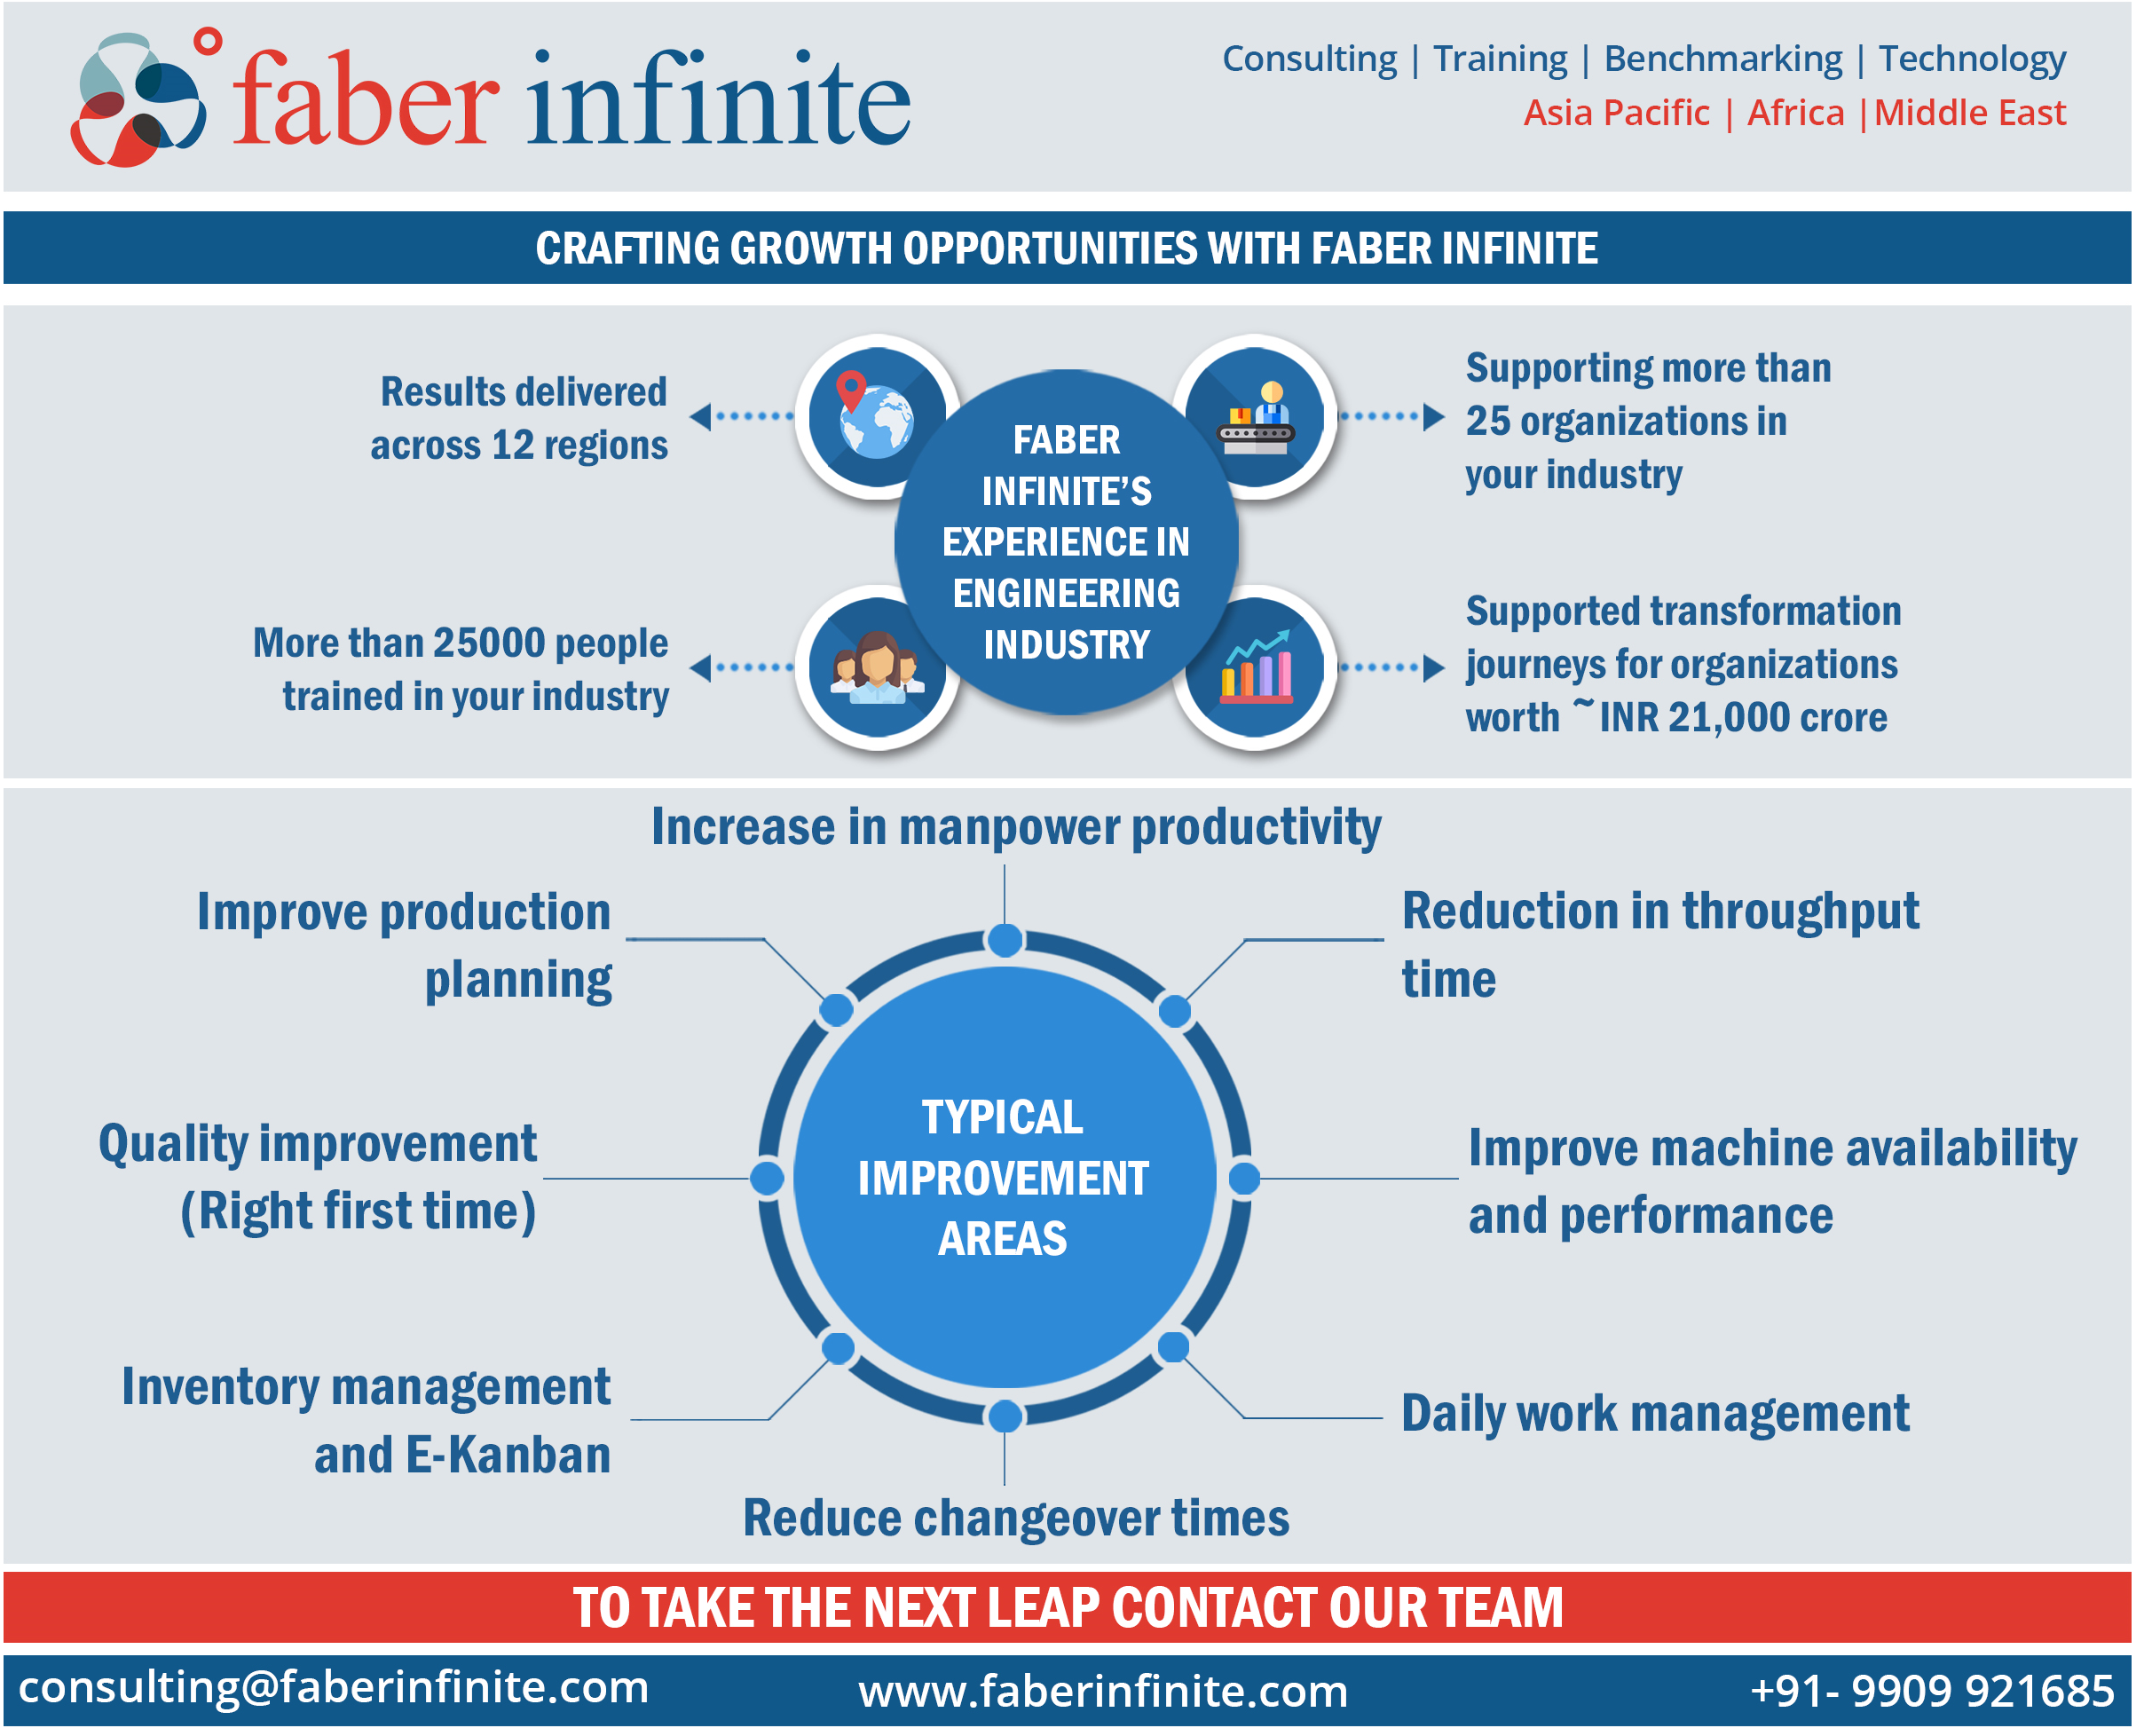 Building Engineering Excellence to Drive Growth | Faber Infinite